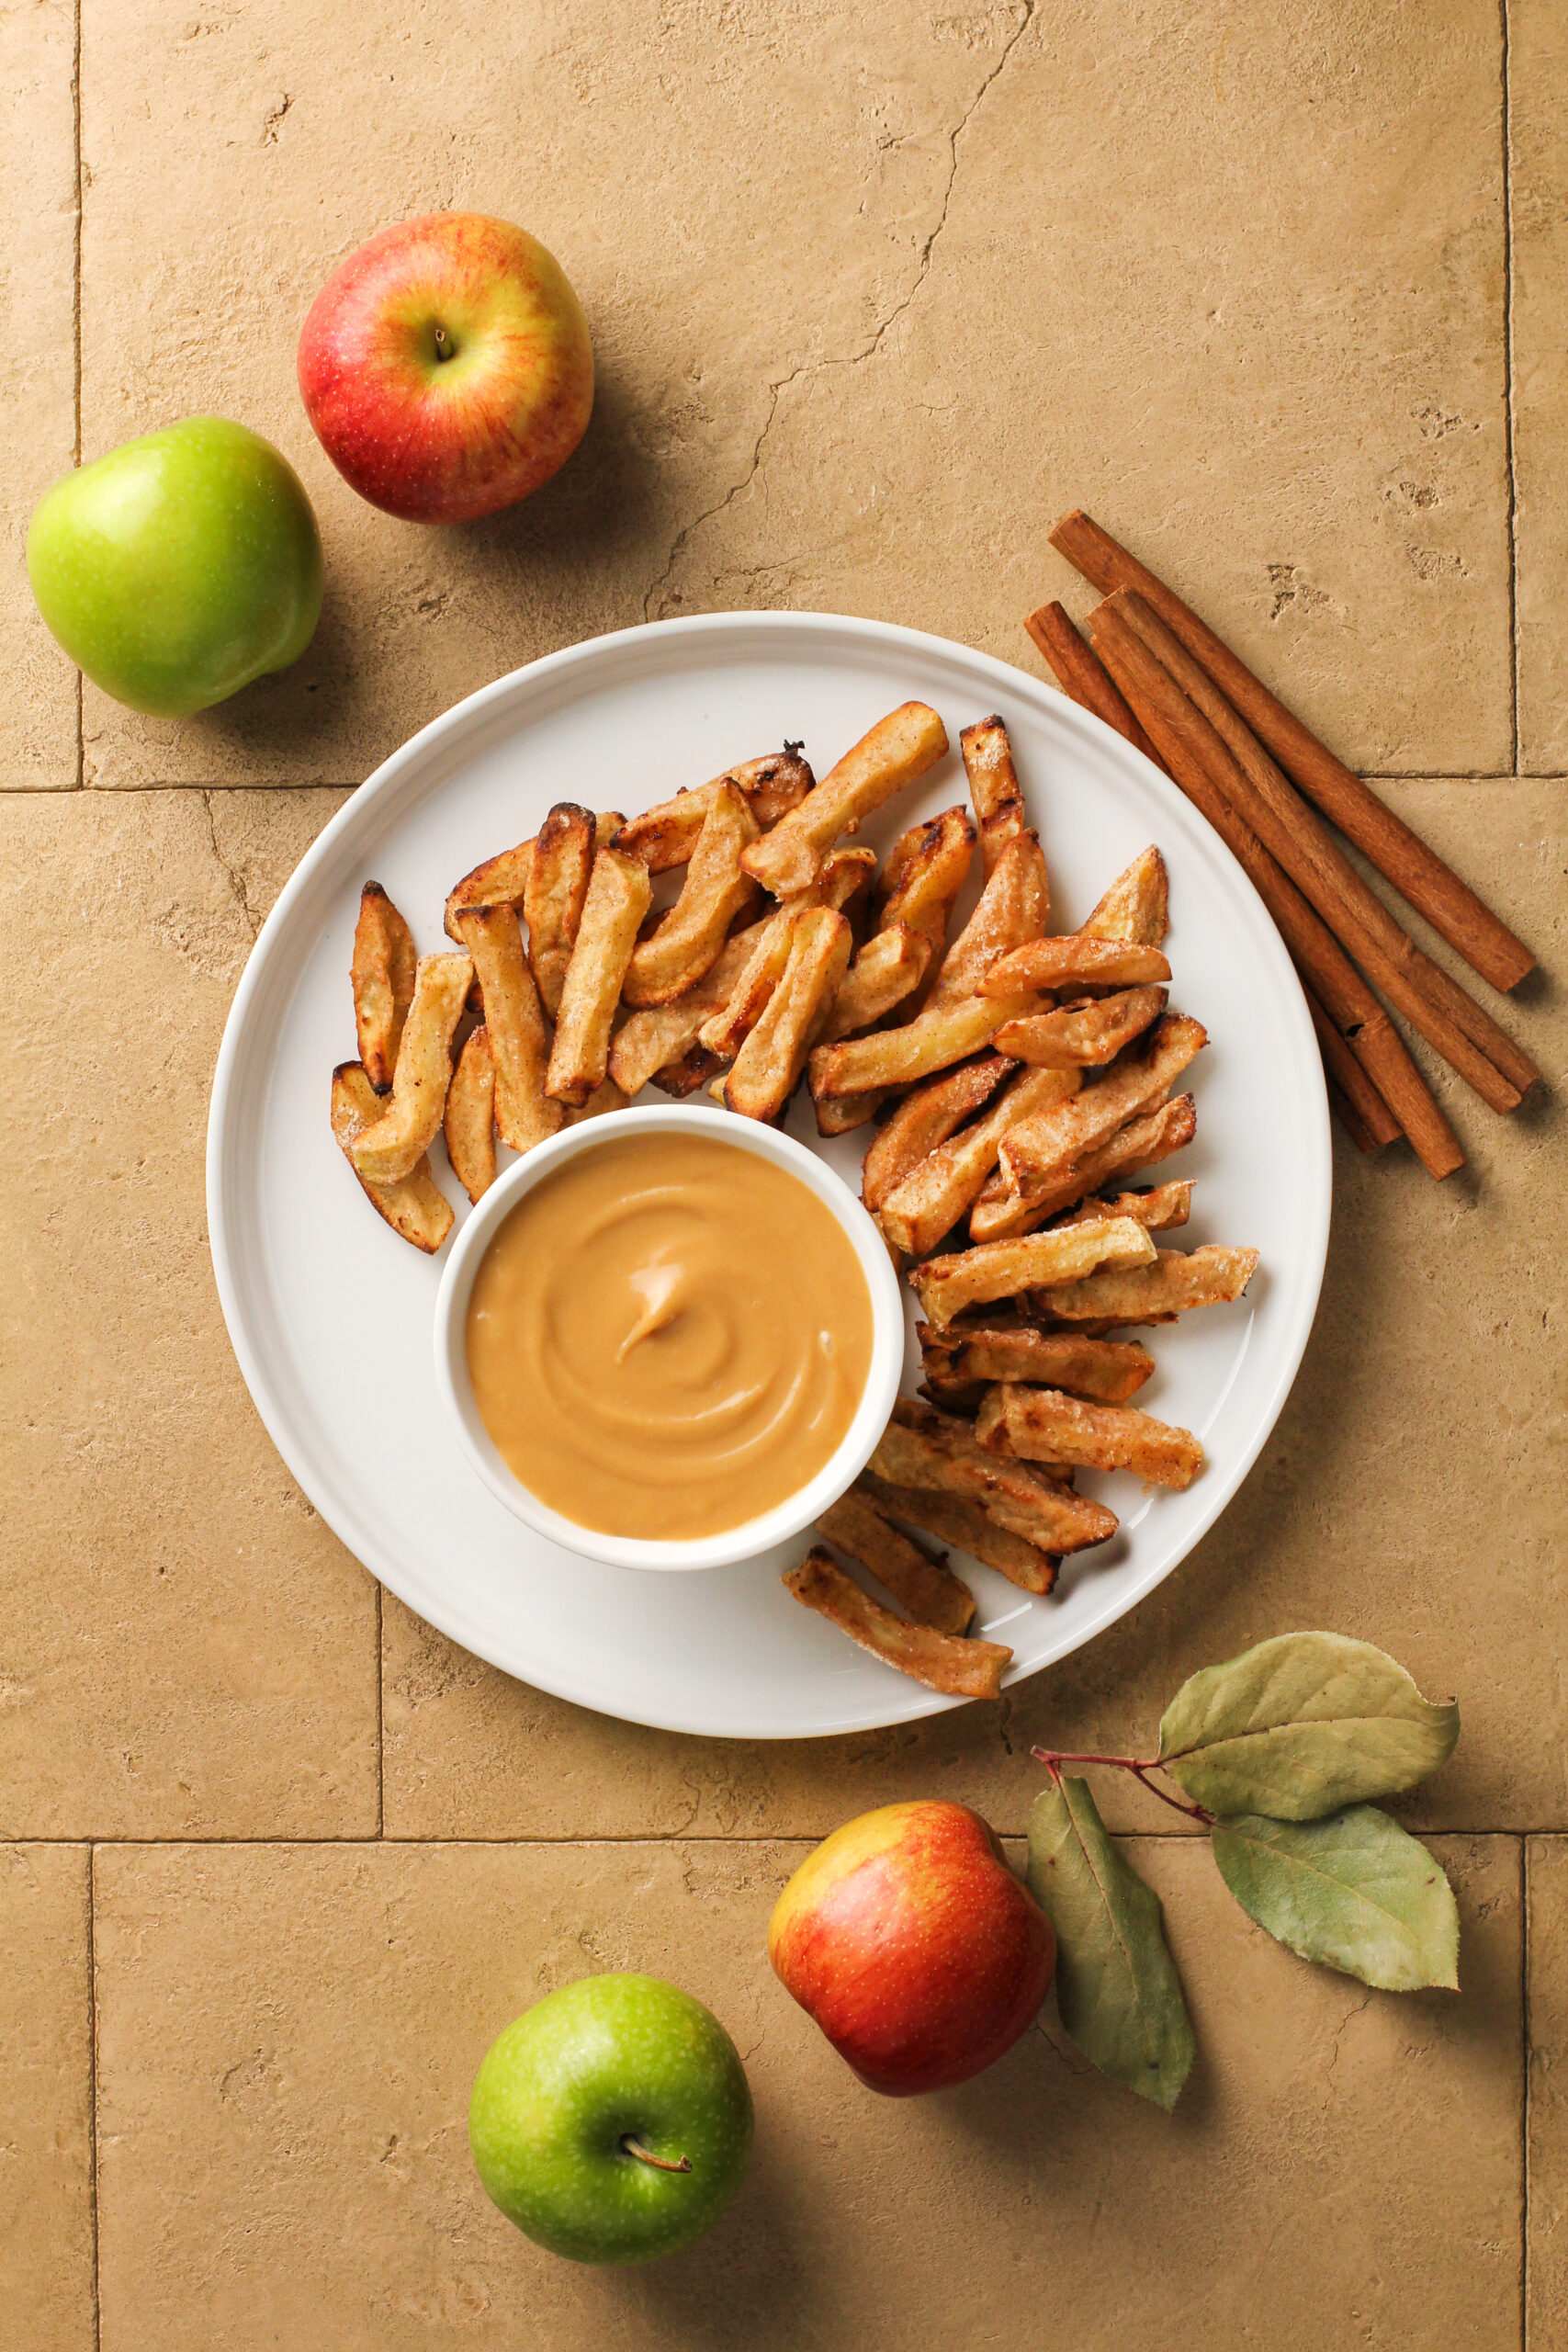 Who doesn't love a great air dryer recipe? CLICK HERE to make your next favorite dessert- Air Fryer Apple Fries with Caramel Cream Dip!